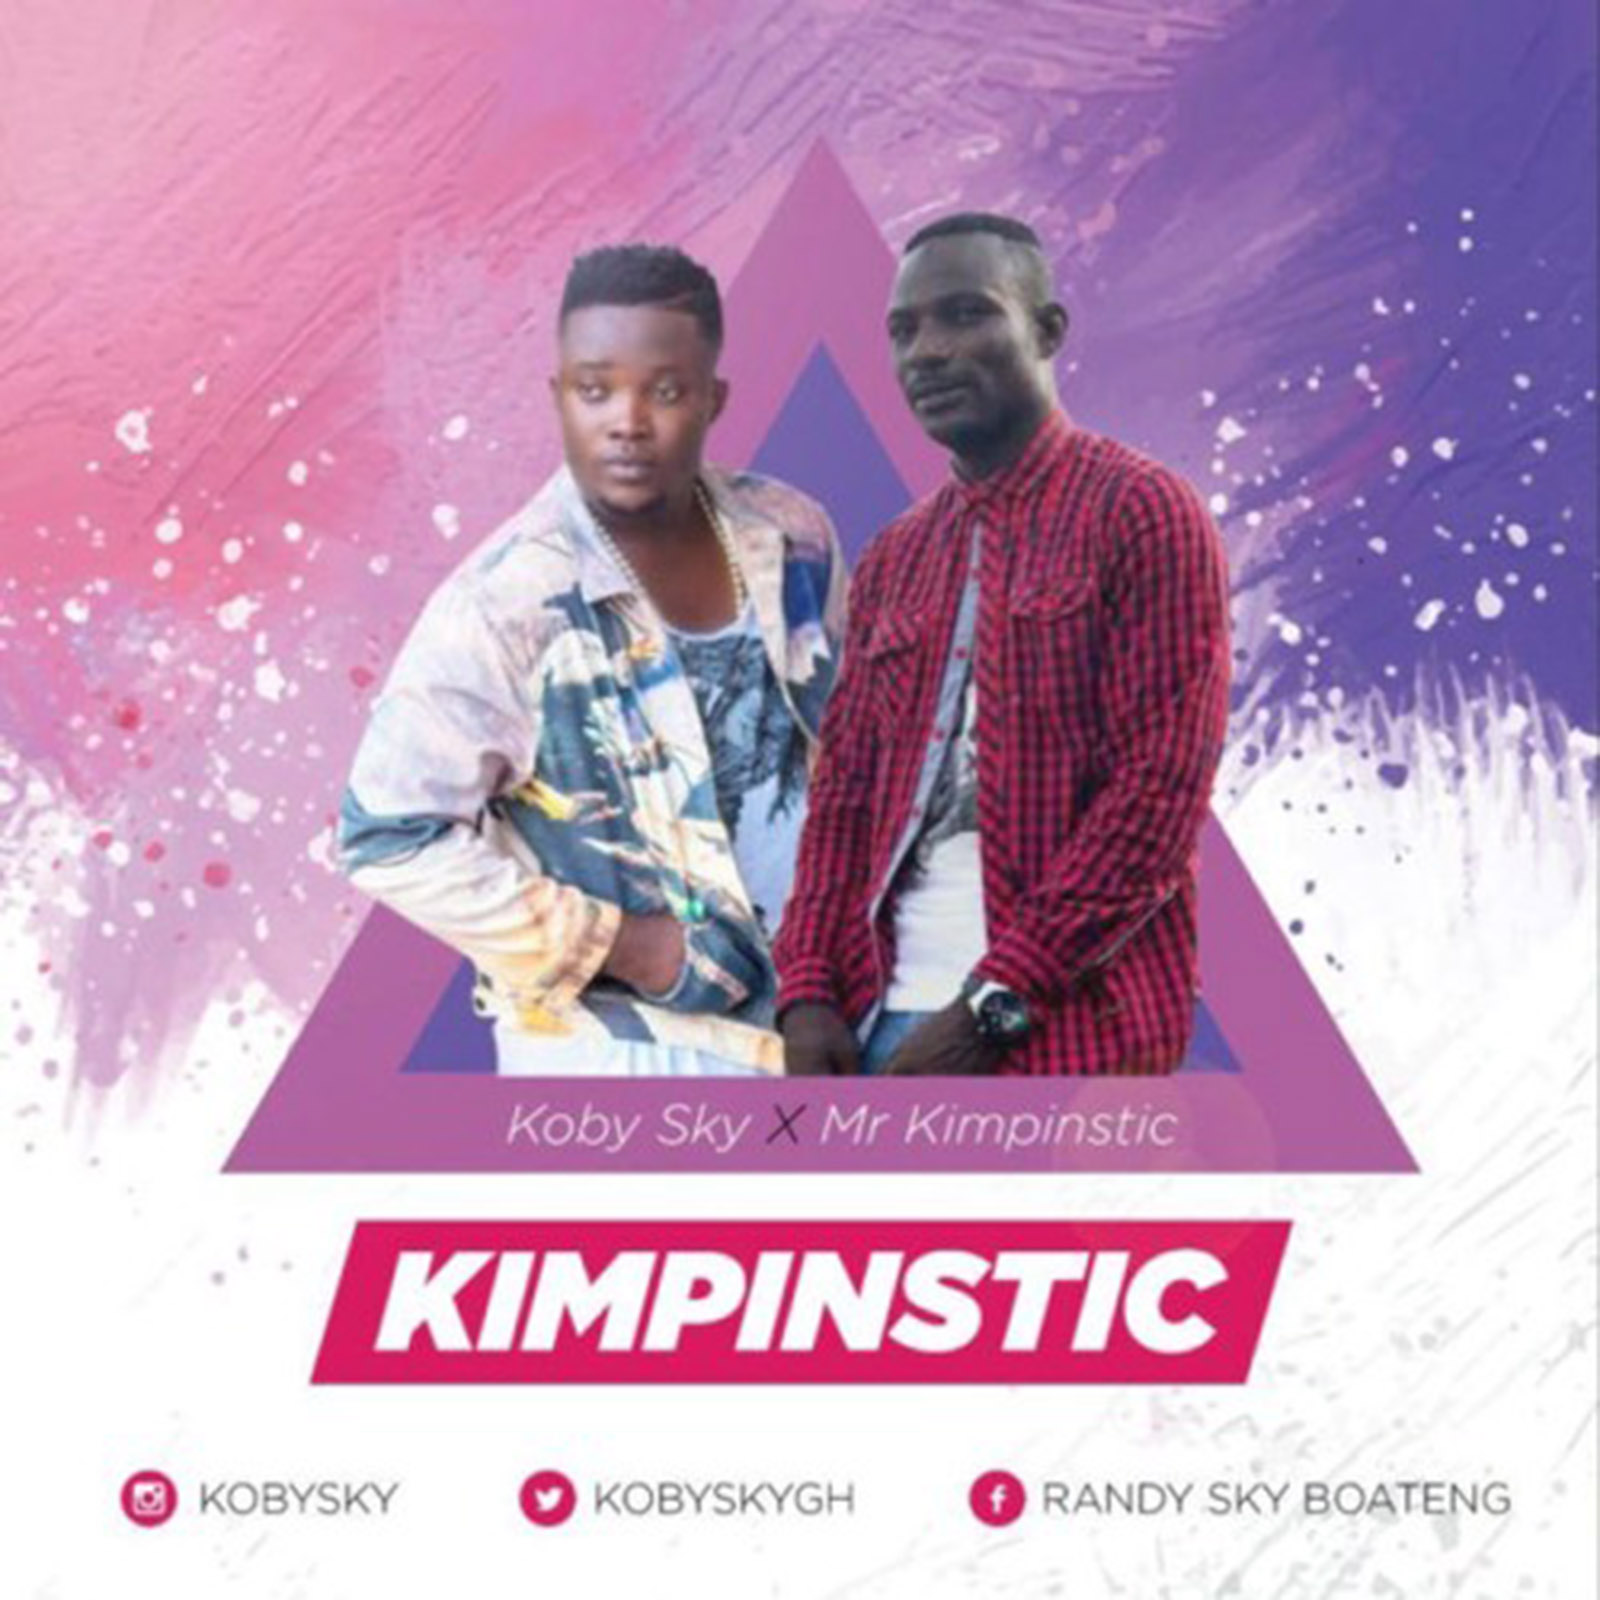 Kimpinstic by Koby Sky feat. Mr Kimpinstic